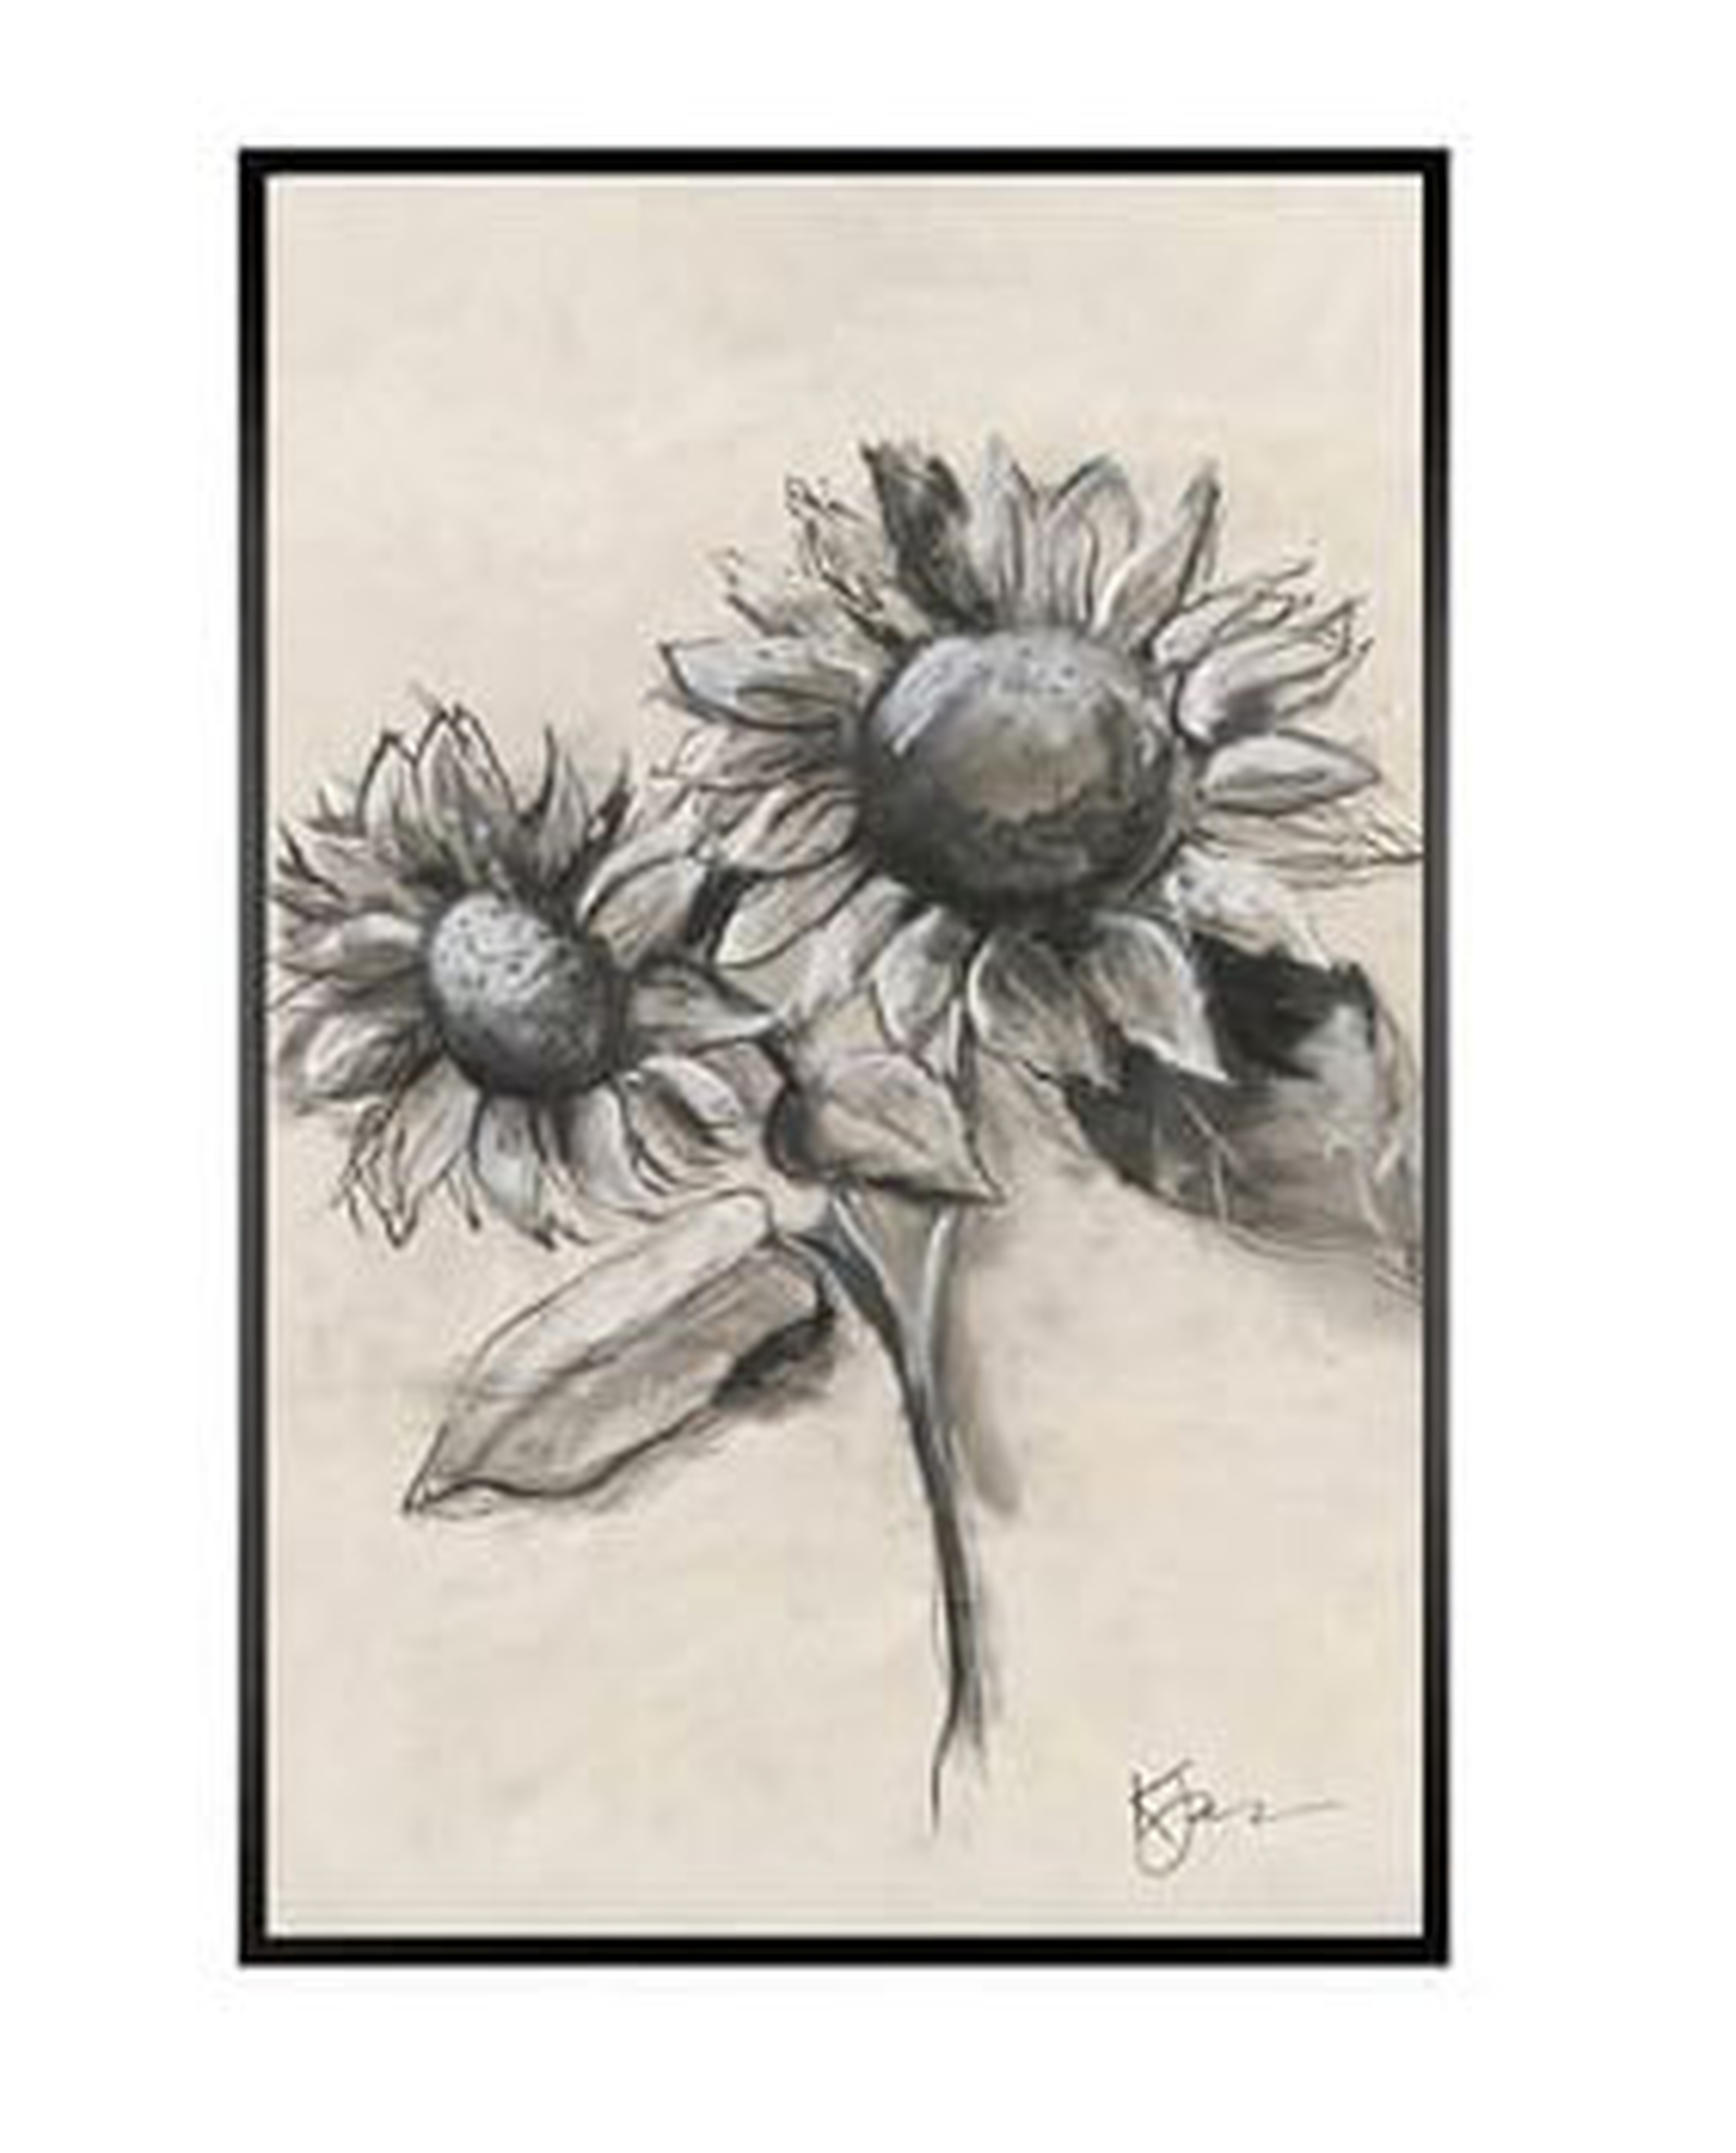 Charcoal Sunflower Sketch, Sunflower with Stem, 11" x 13" Wood Gallery, Black, Mat - Pottery Barn